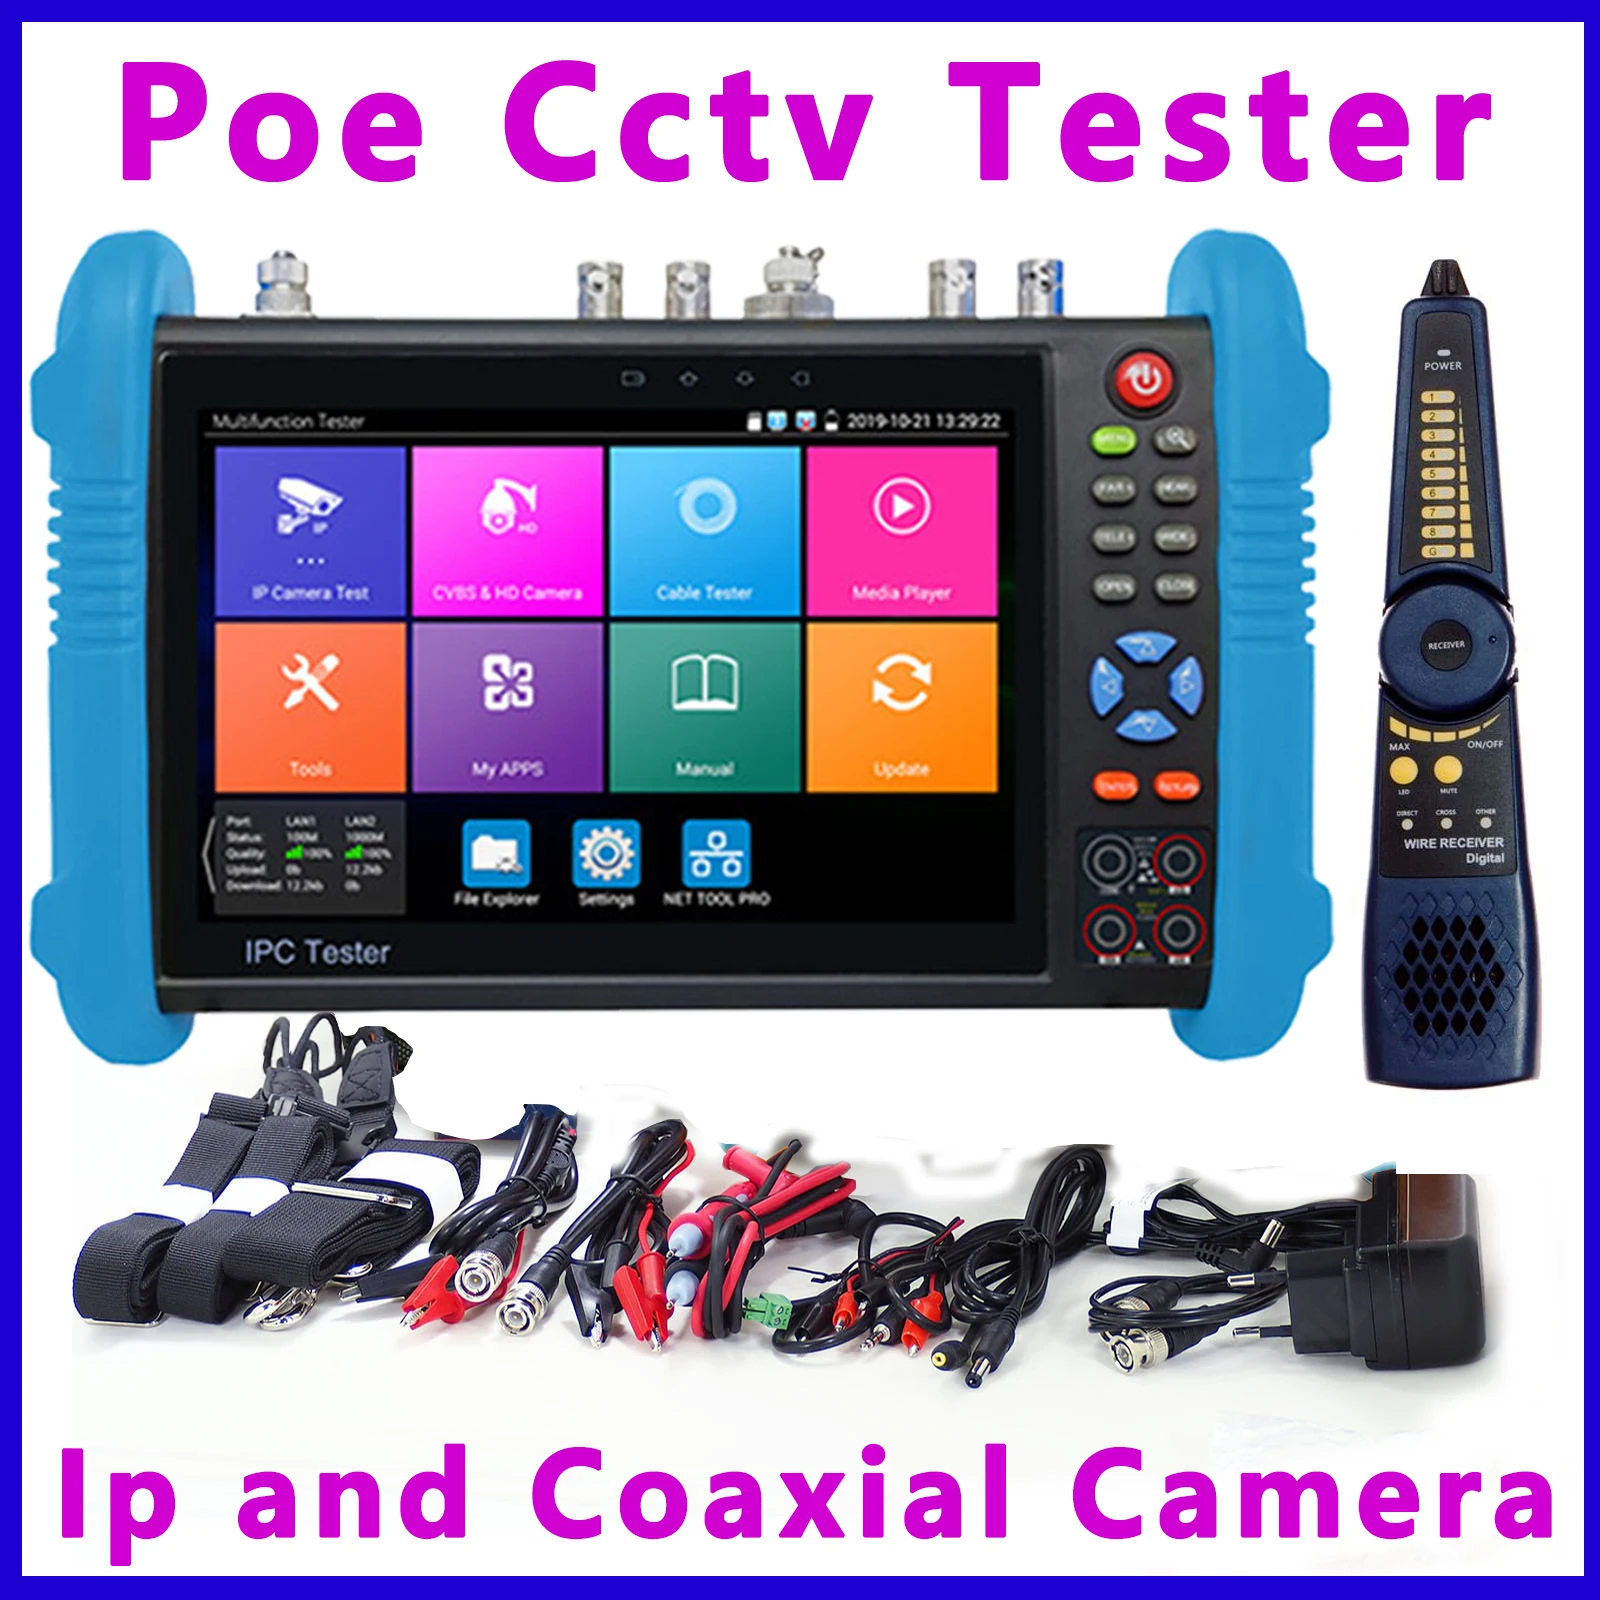 

Ipc 9800movtadhs Plus Poe Cctv Tester Video Tester Security Camera Monitor 4k Hd Sdi Ip and Coaxial Camera Tester Rj45 Test Iptv